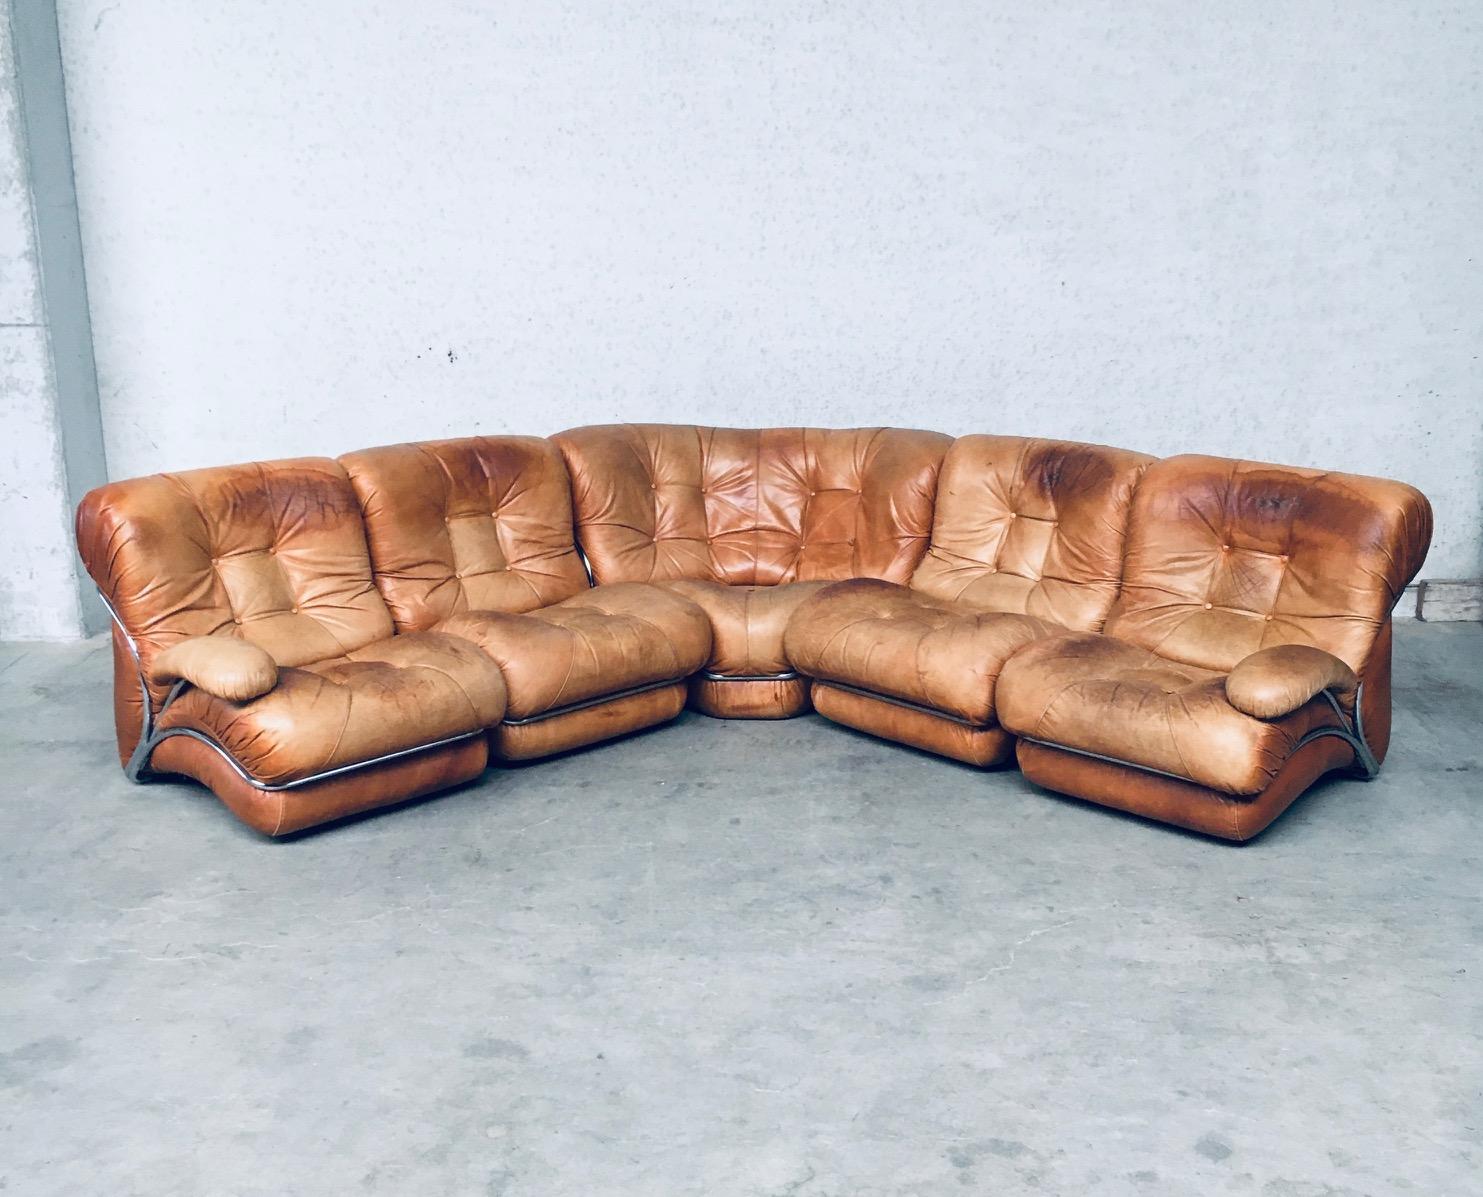 Vintage Midcentury Modern Italian Design 'COROLLA' Leather Sectional Sofa by I.P.E. Italy 1970's. Marked on the bottom. Cognac leather on chrome metal frame with detachable arm rests on 2 sofa parts. 5 sectional parts; 4 chairs and 1 corner chair.